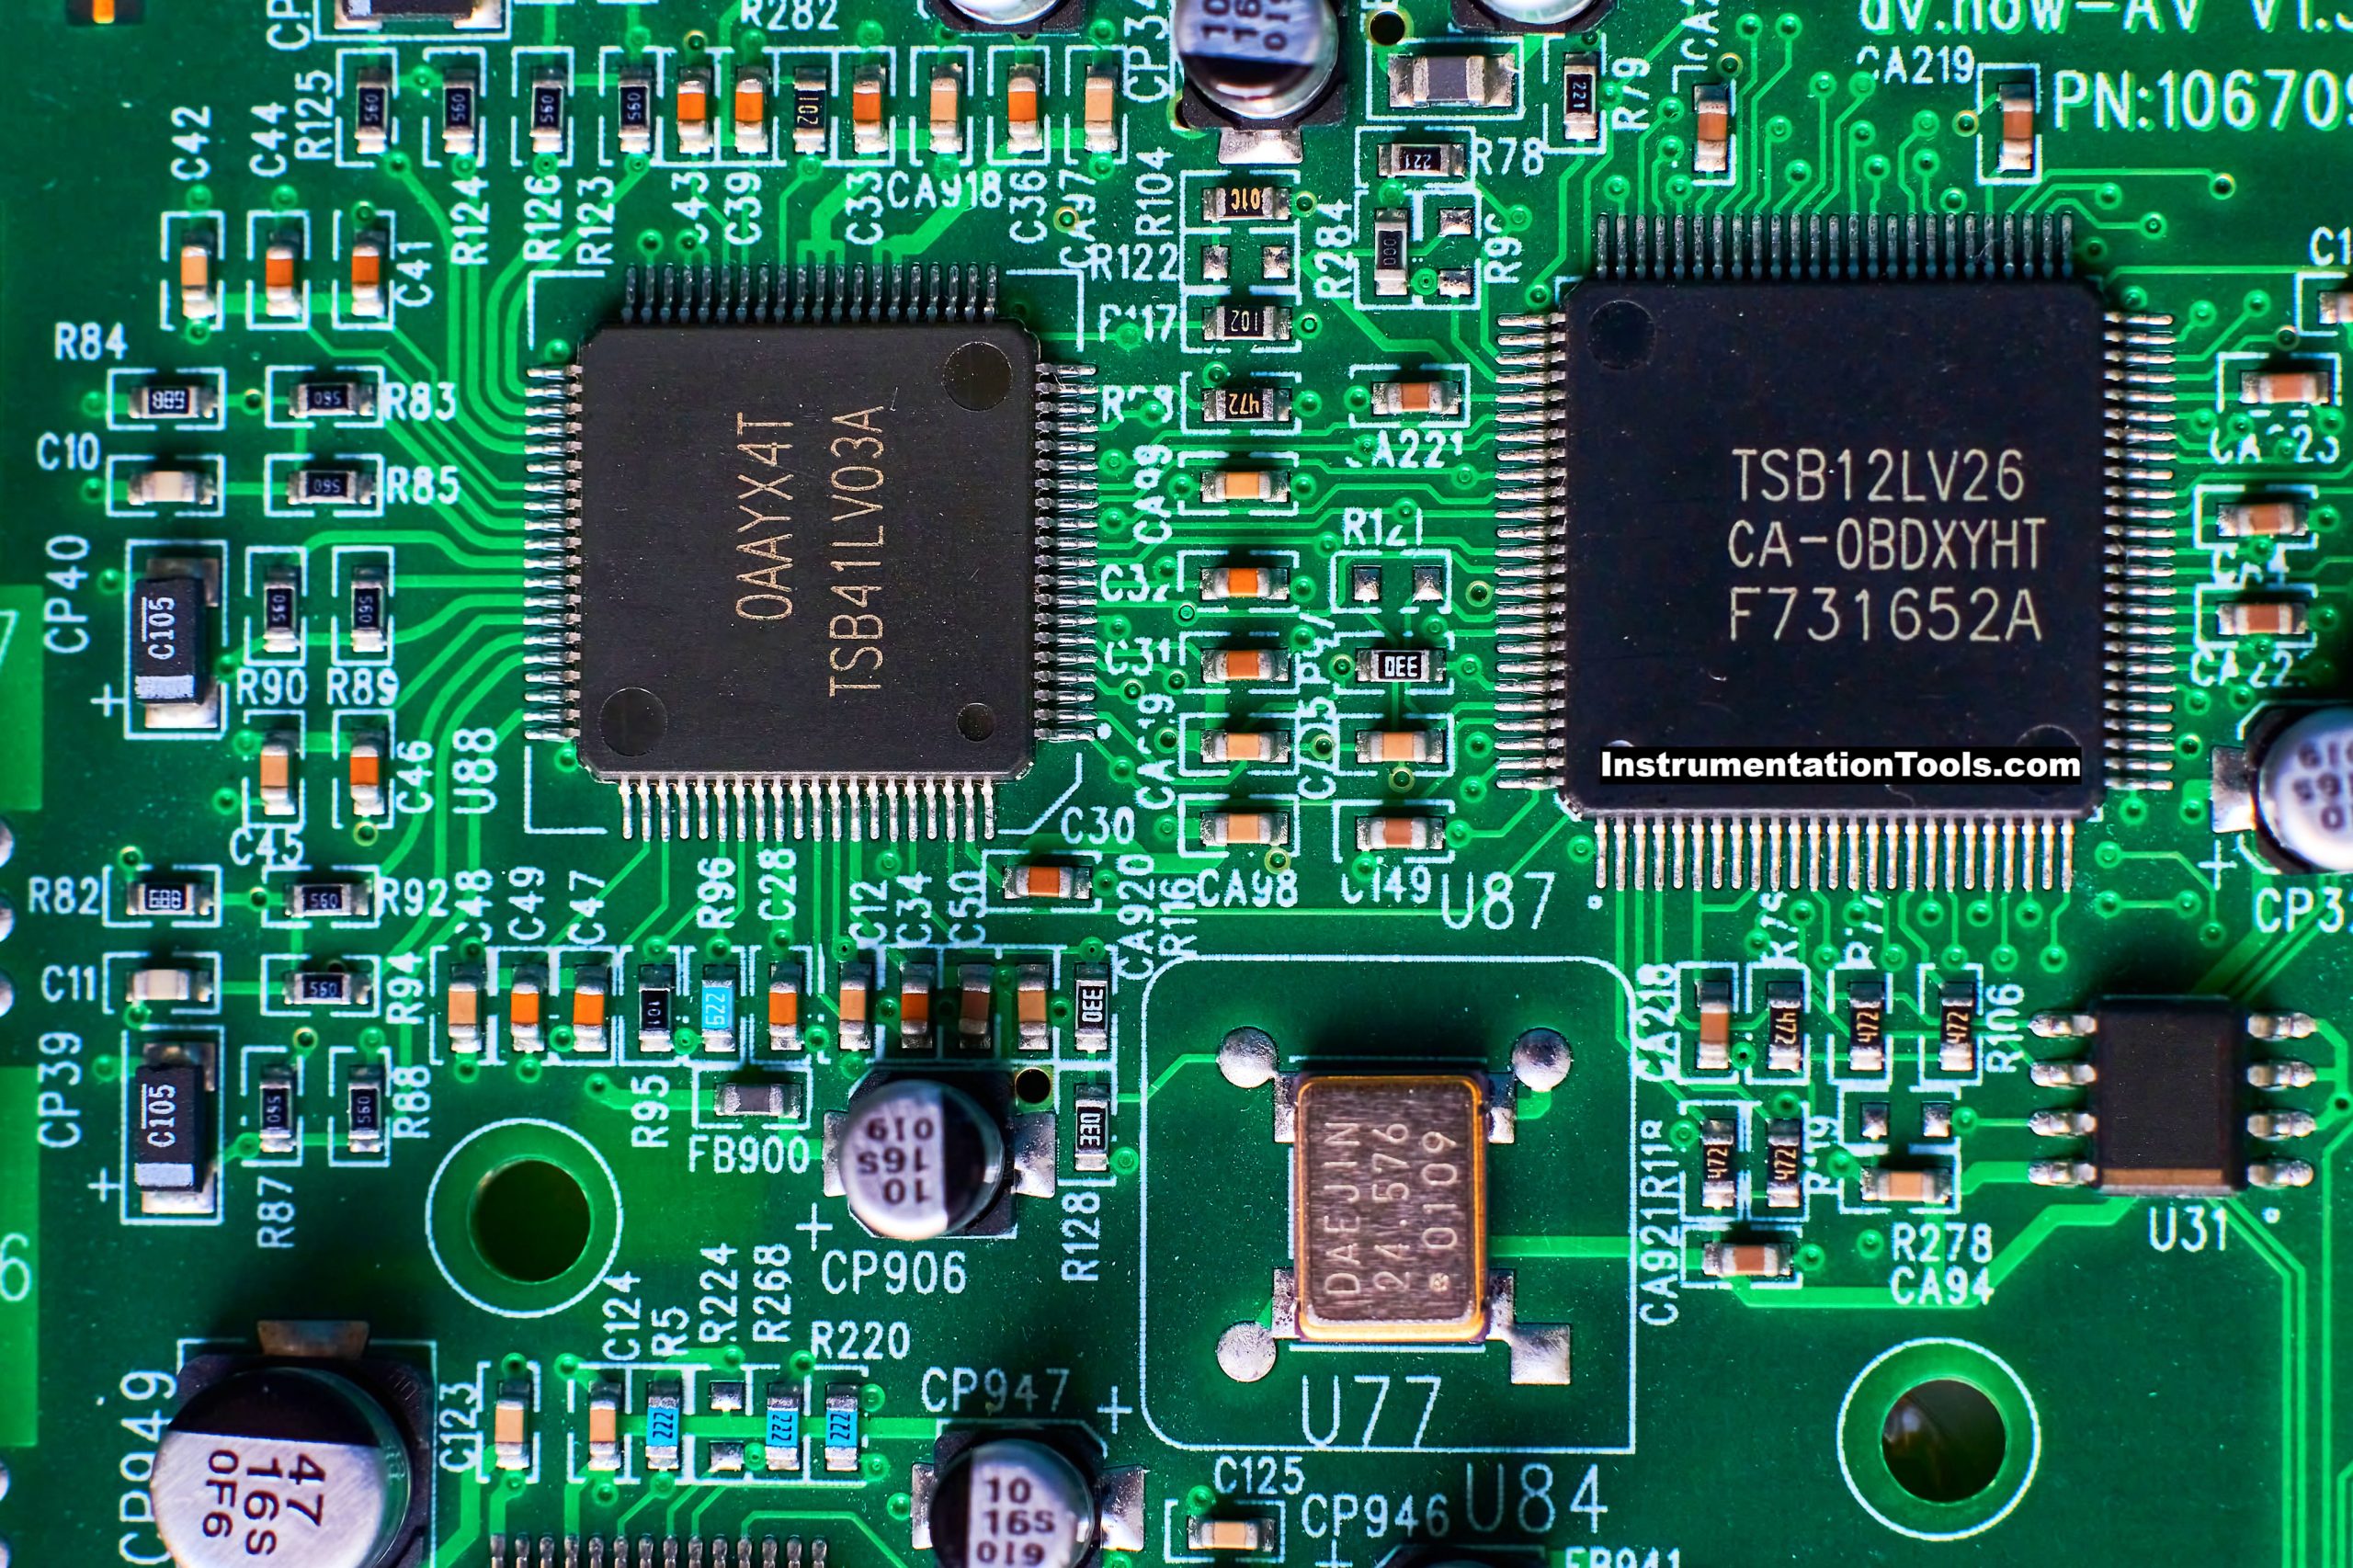 FPGA vs. CPLD - What are the differences between them